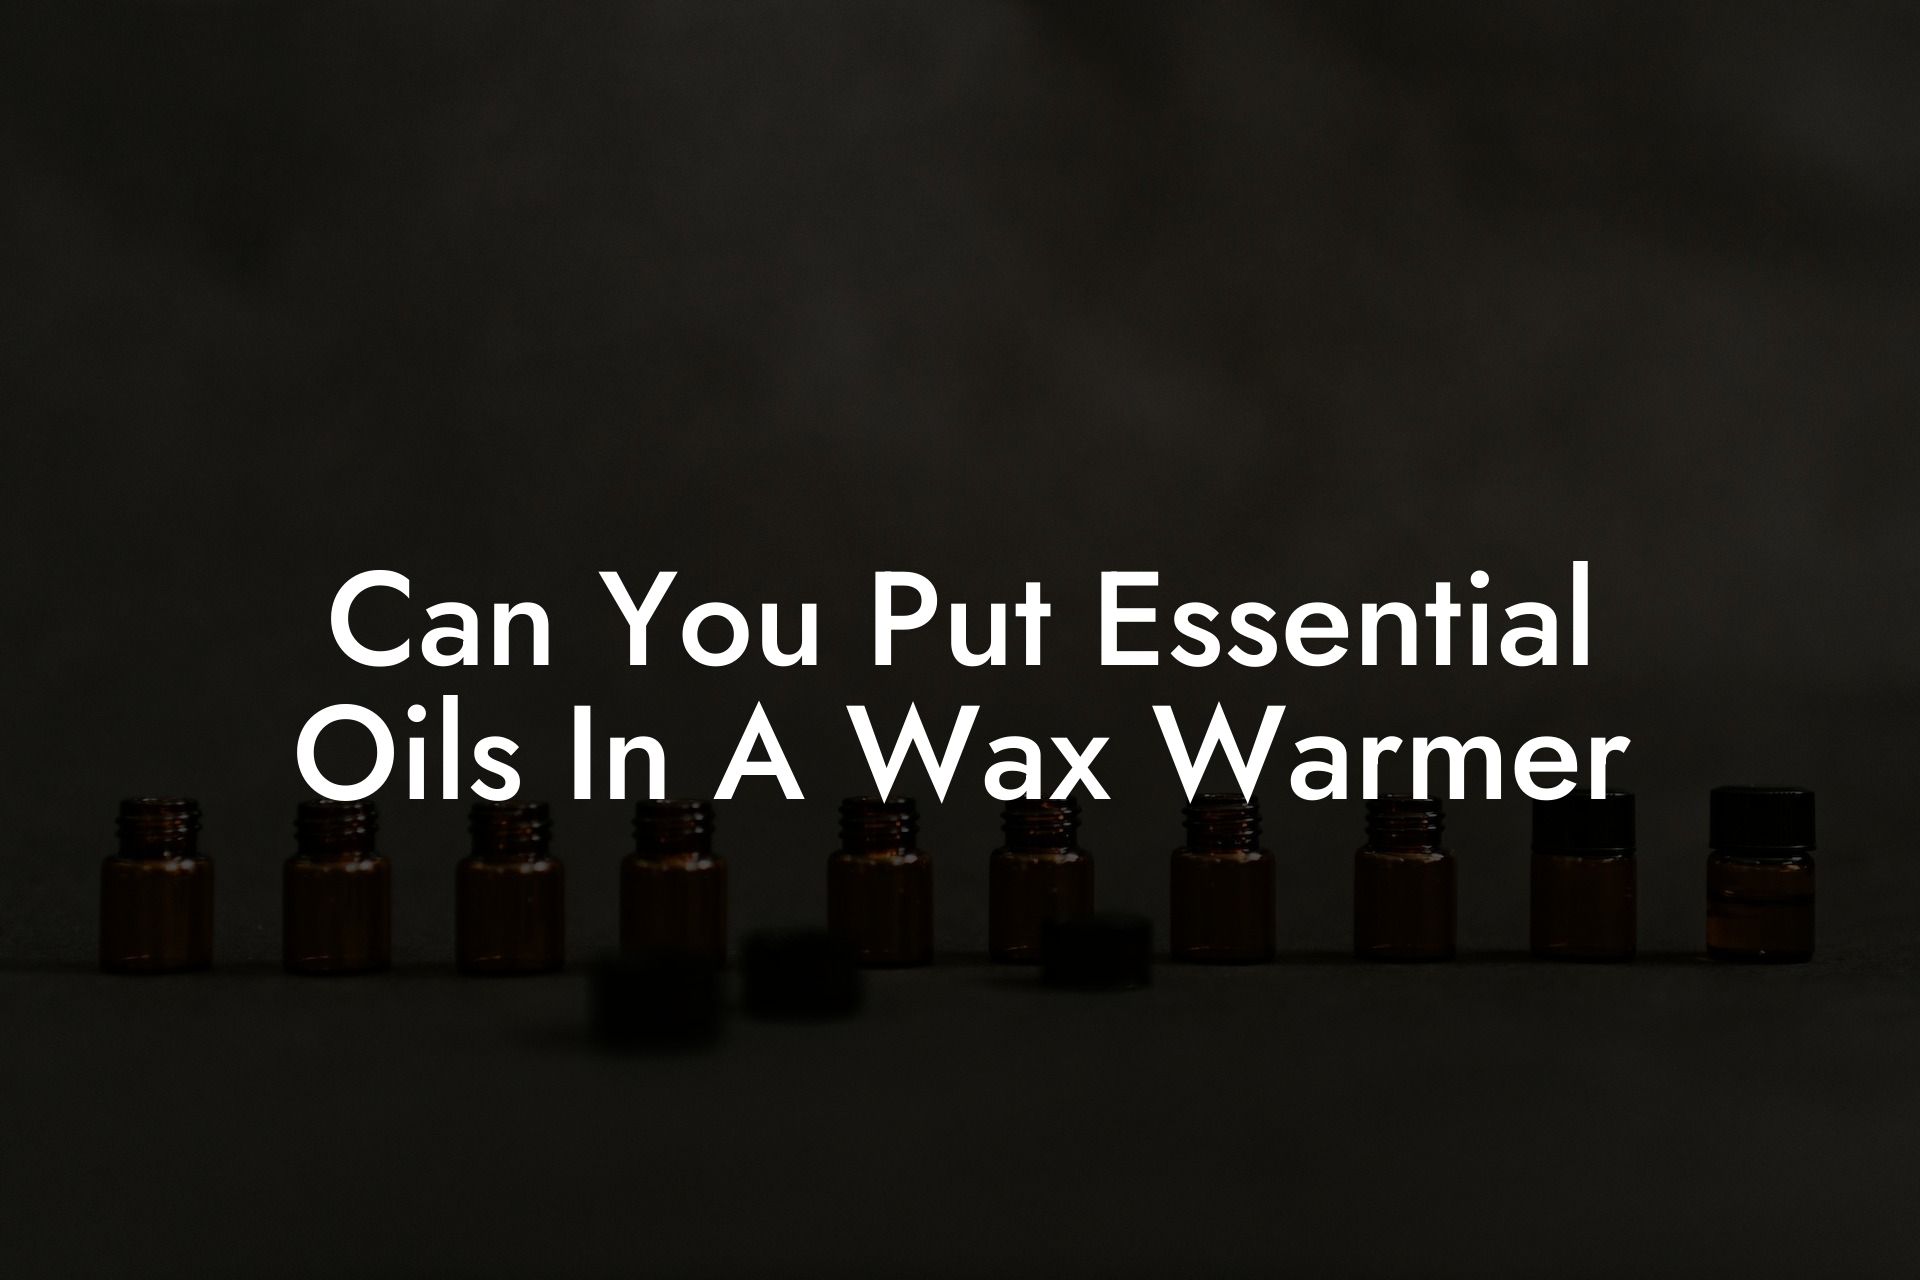 Can You Put Essential Oils In A Wax Warmer